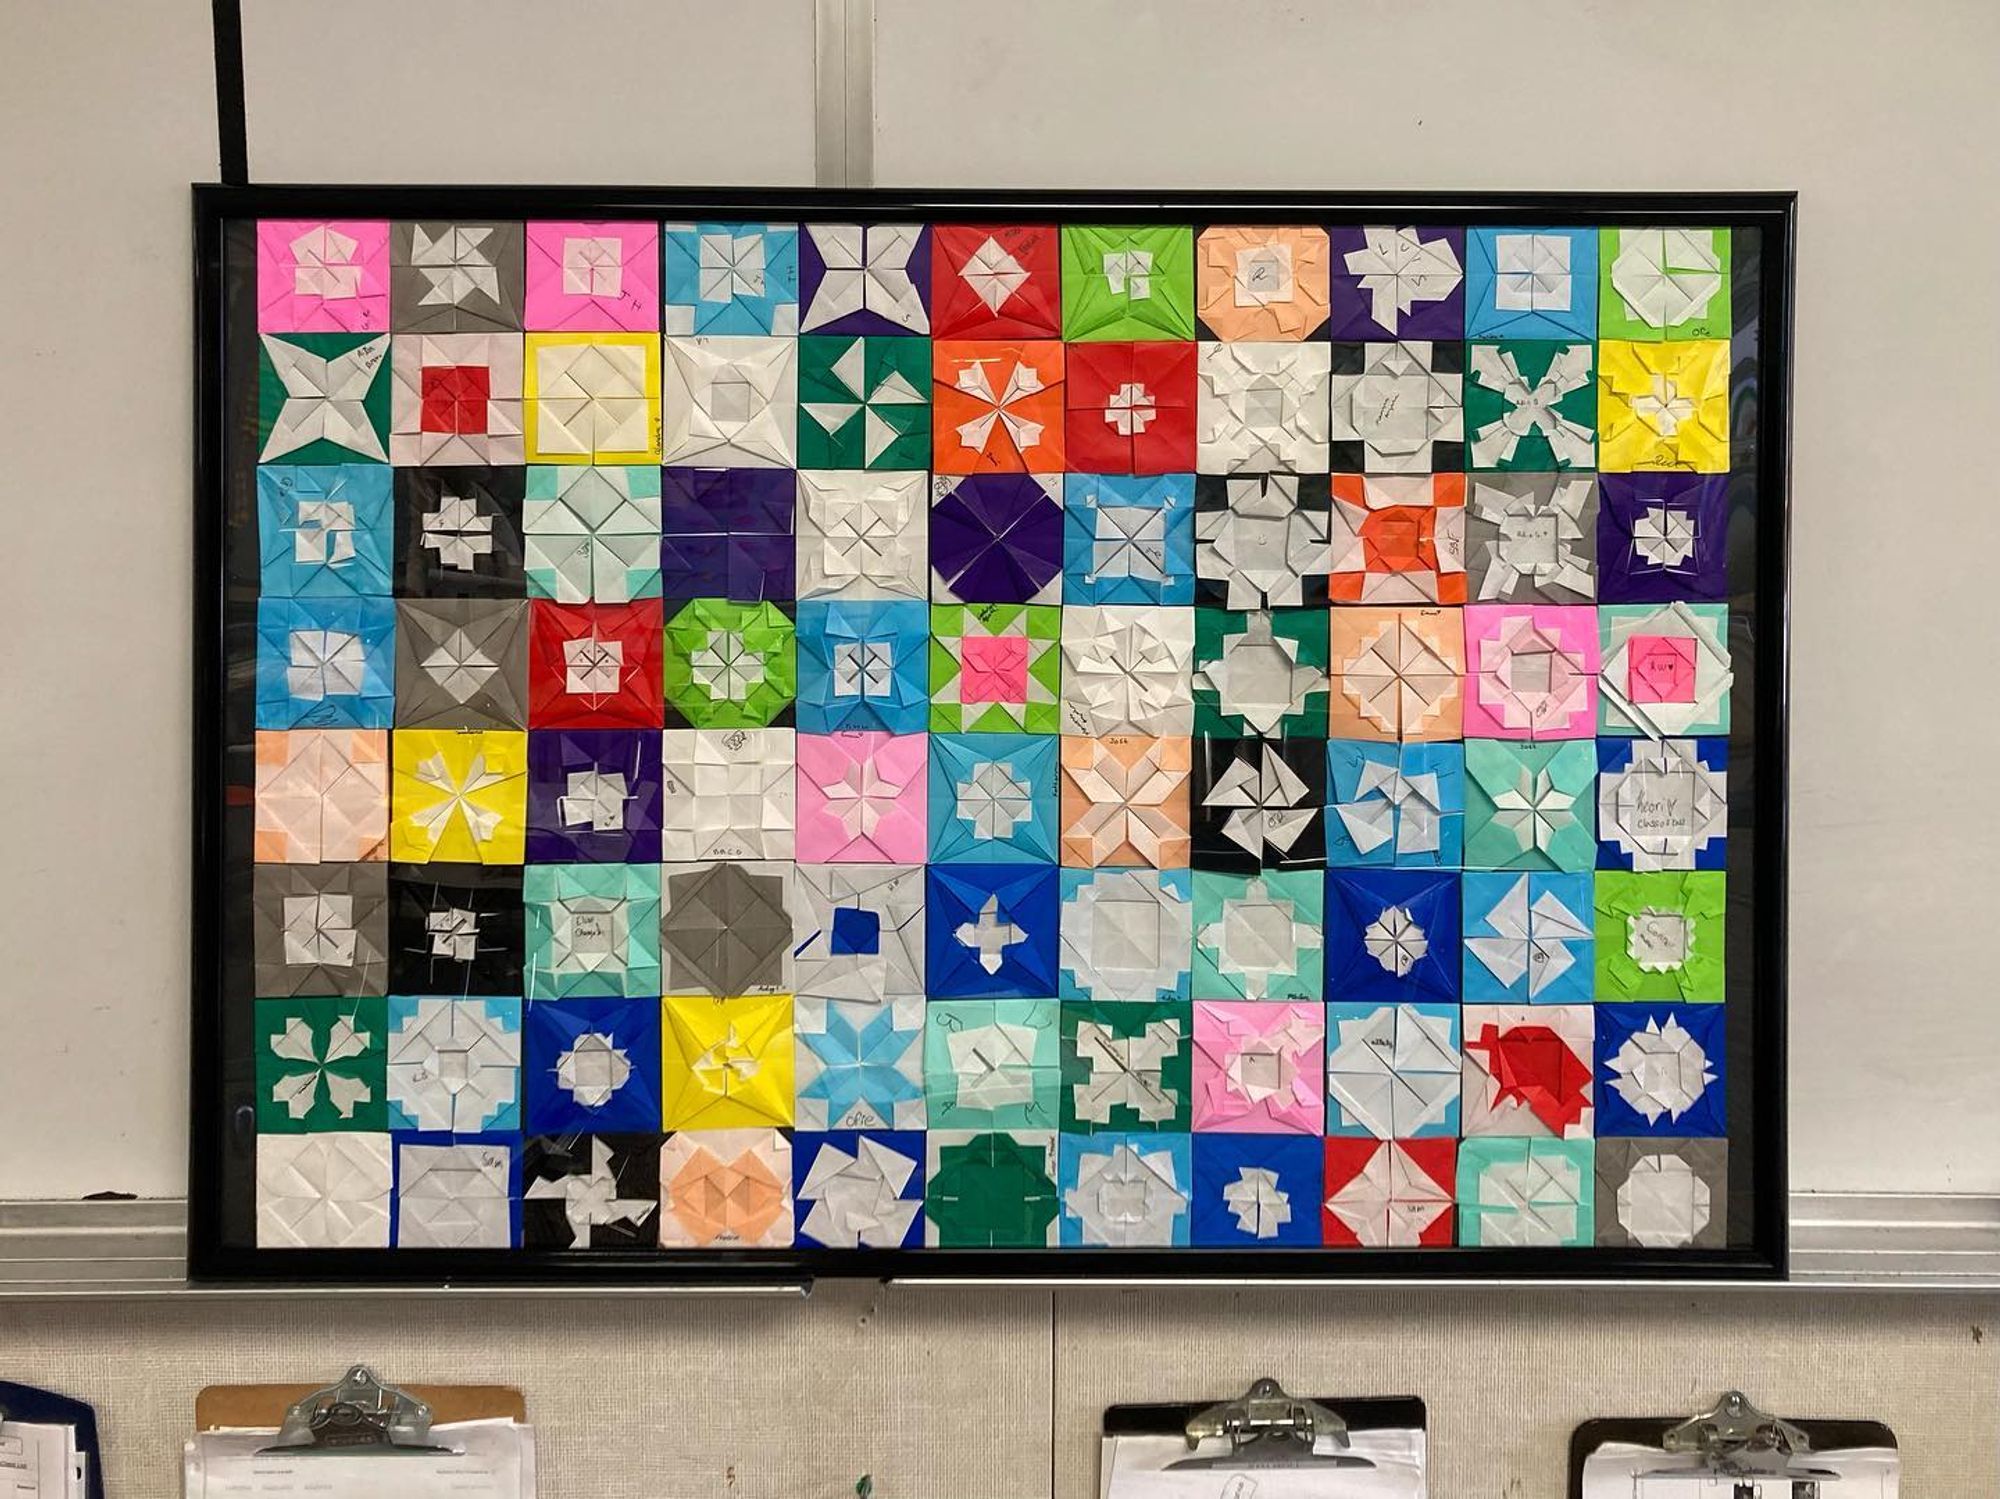 From a one week origami workshop with 7-12th graders. We learned the basics of origami, folded models the students were interested in and combined all of their experience to create this mosaic. Based on Froebel Squares, I taught students how to fold the windmill base and then they created their own symmetrical pattern.